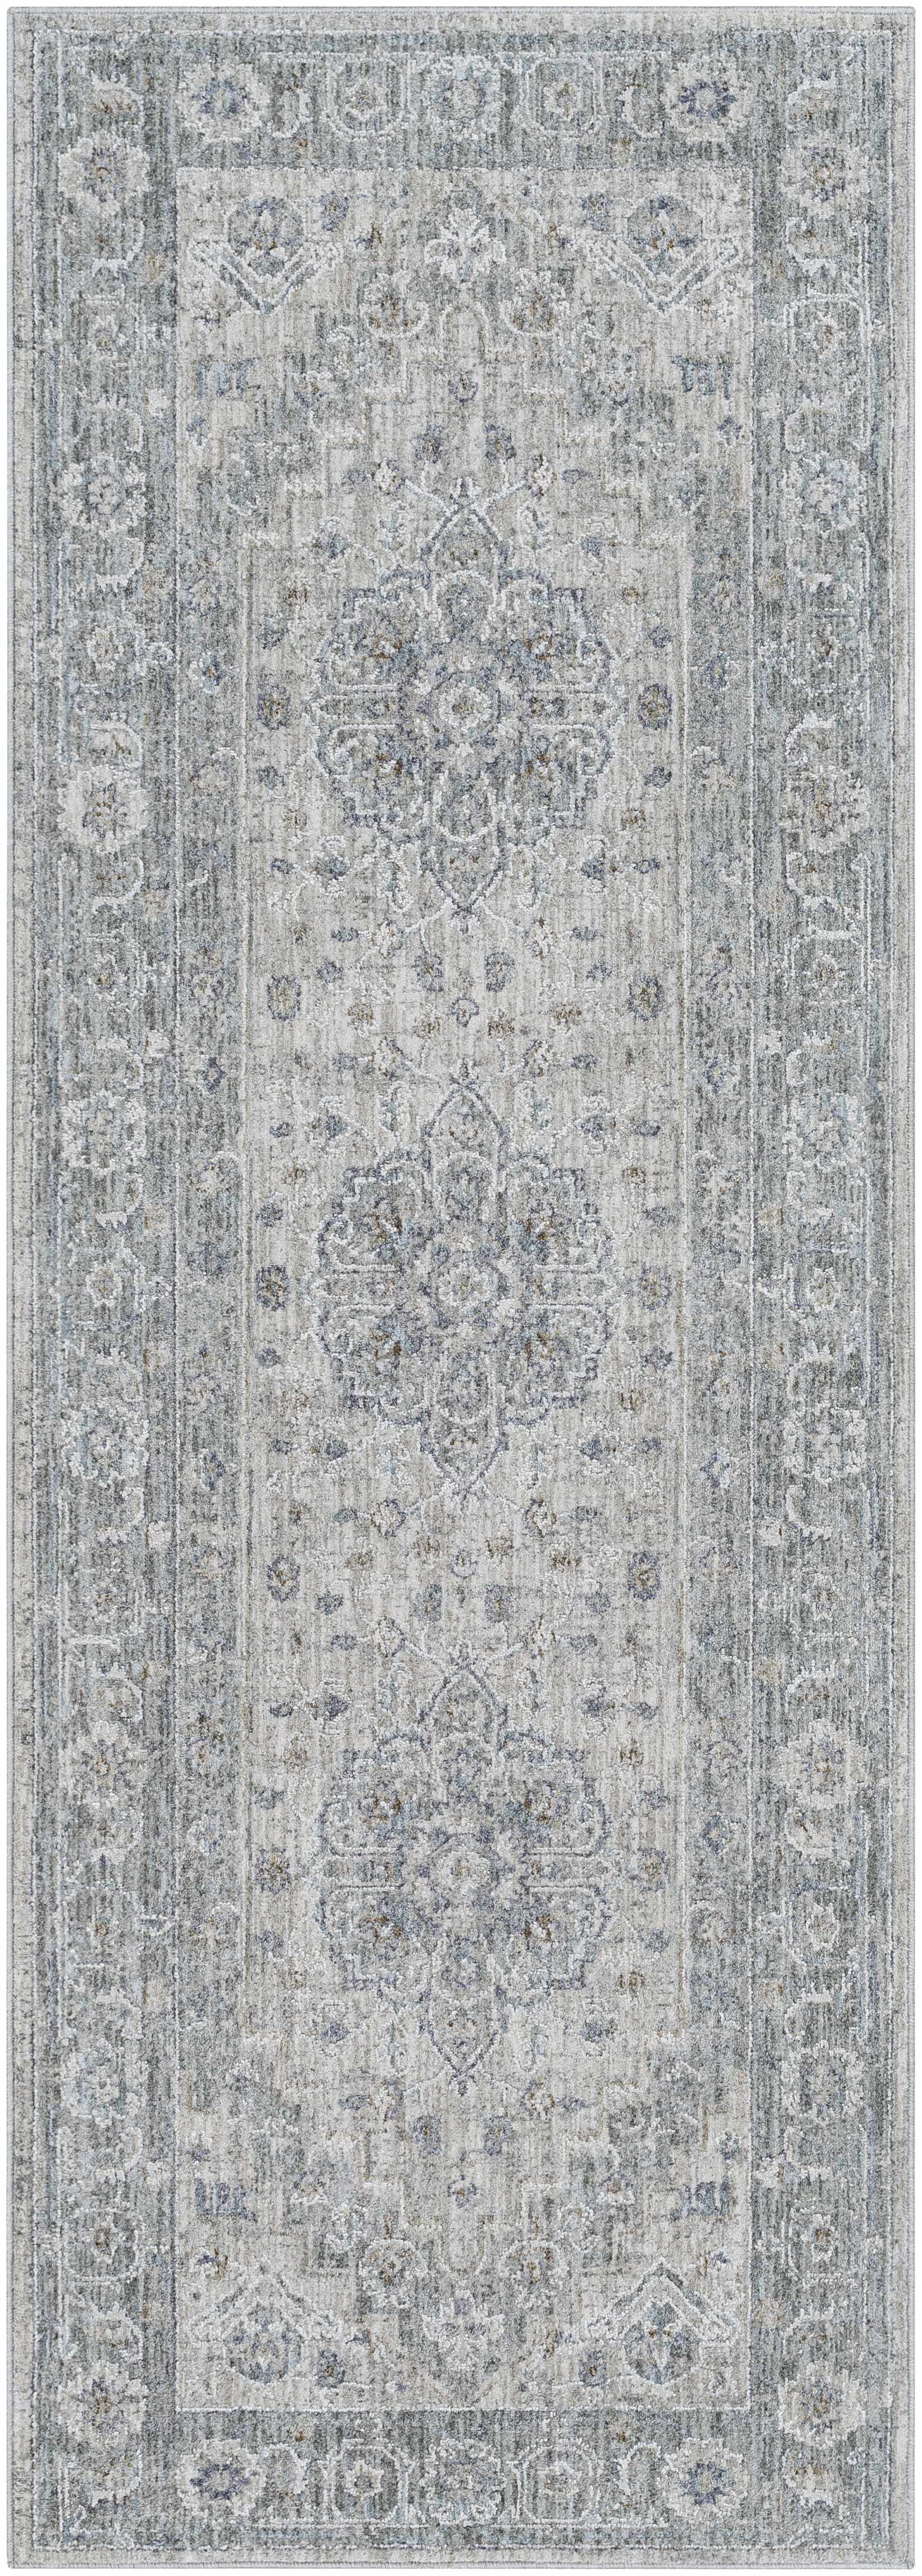 Boutique Rugs Rugs 2'7" x 10' Runner Semaphore Area Rug